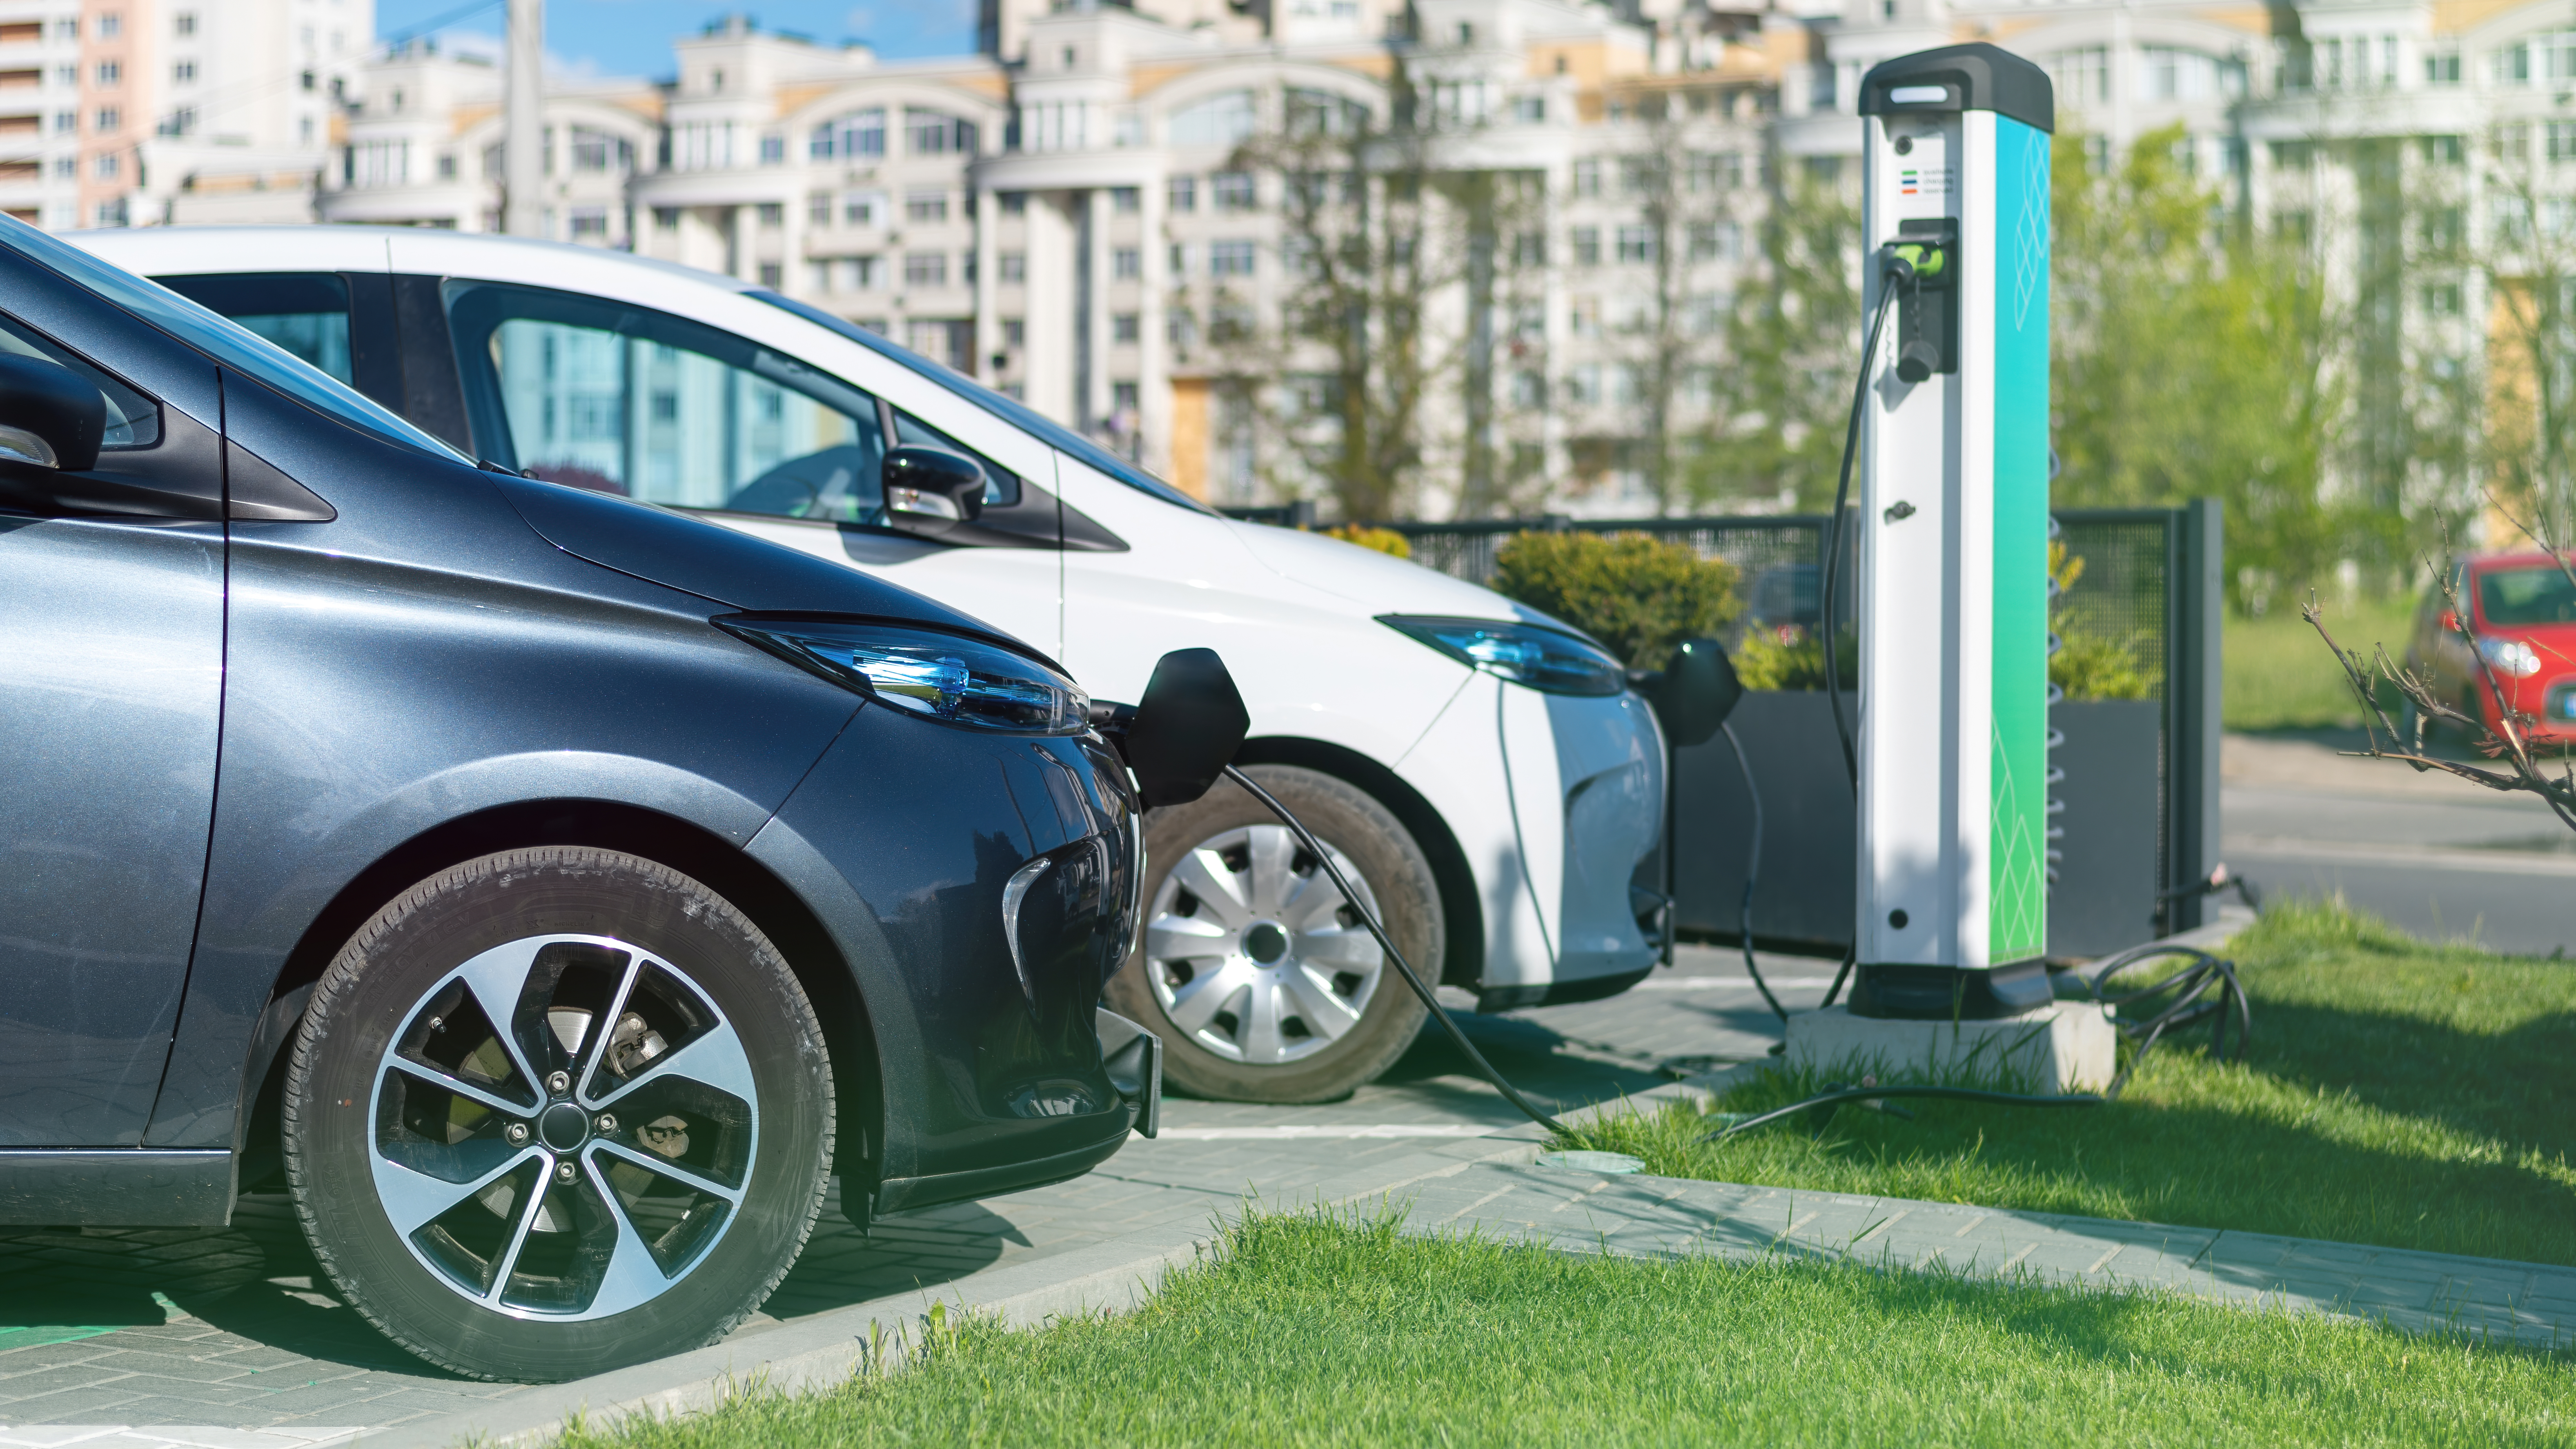 Installing EV Charging Stations in Housing Societies: Challenges and Solutions